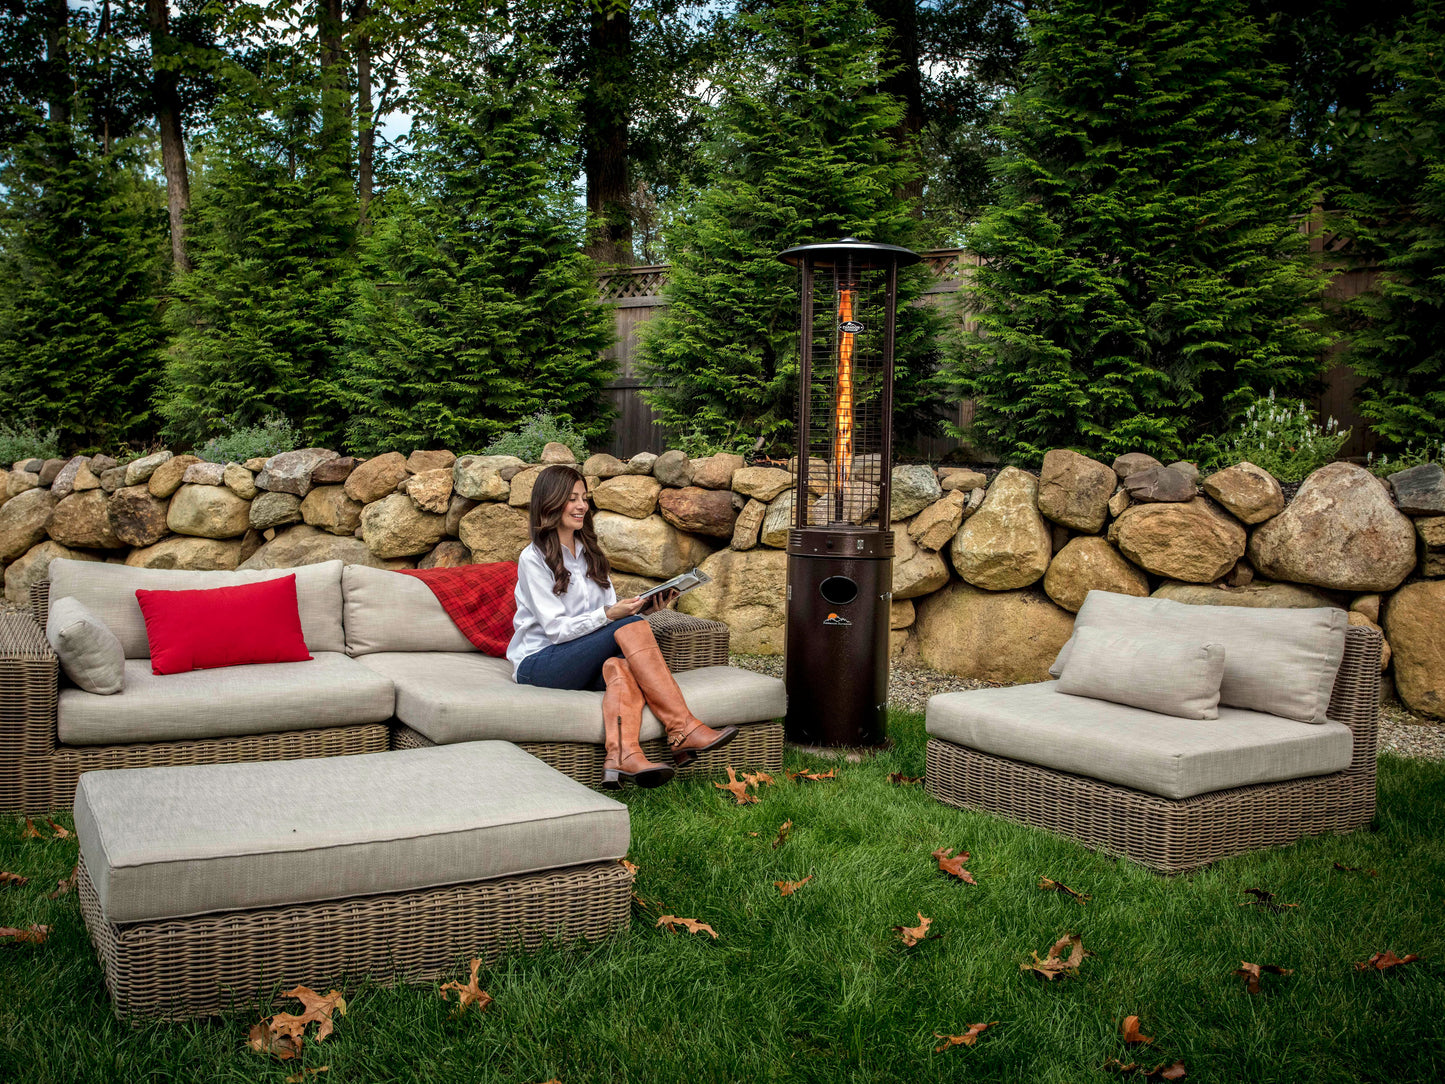 Woman seated on outdoor couch in front of Shine Patio Heater with visible Flame.